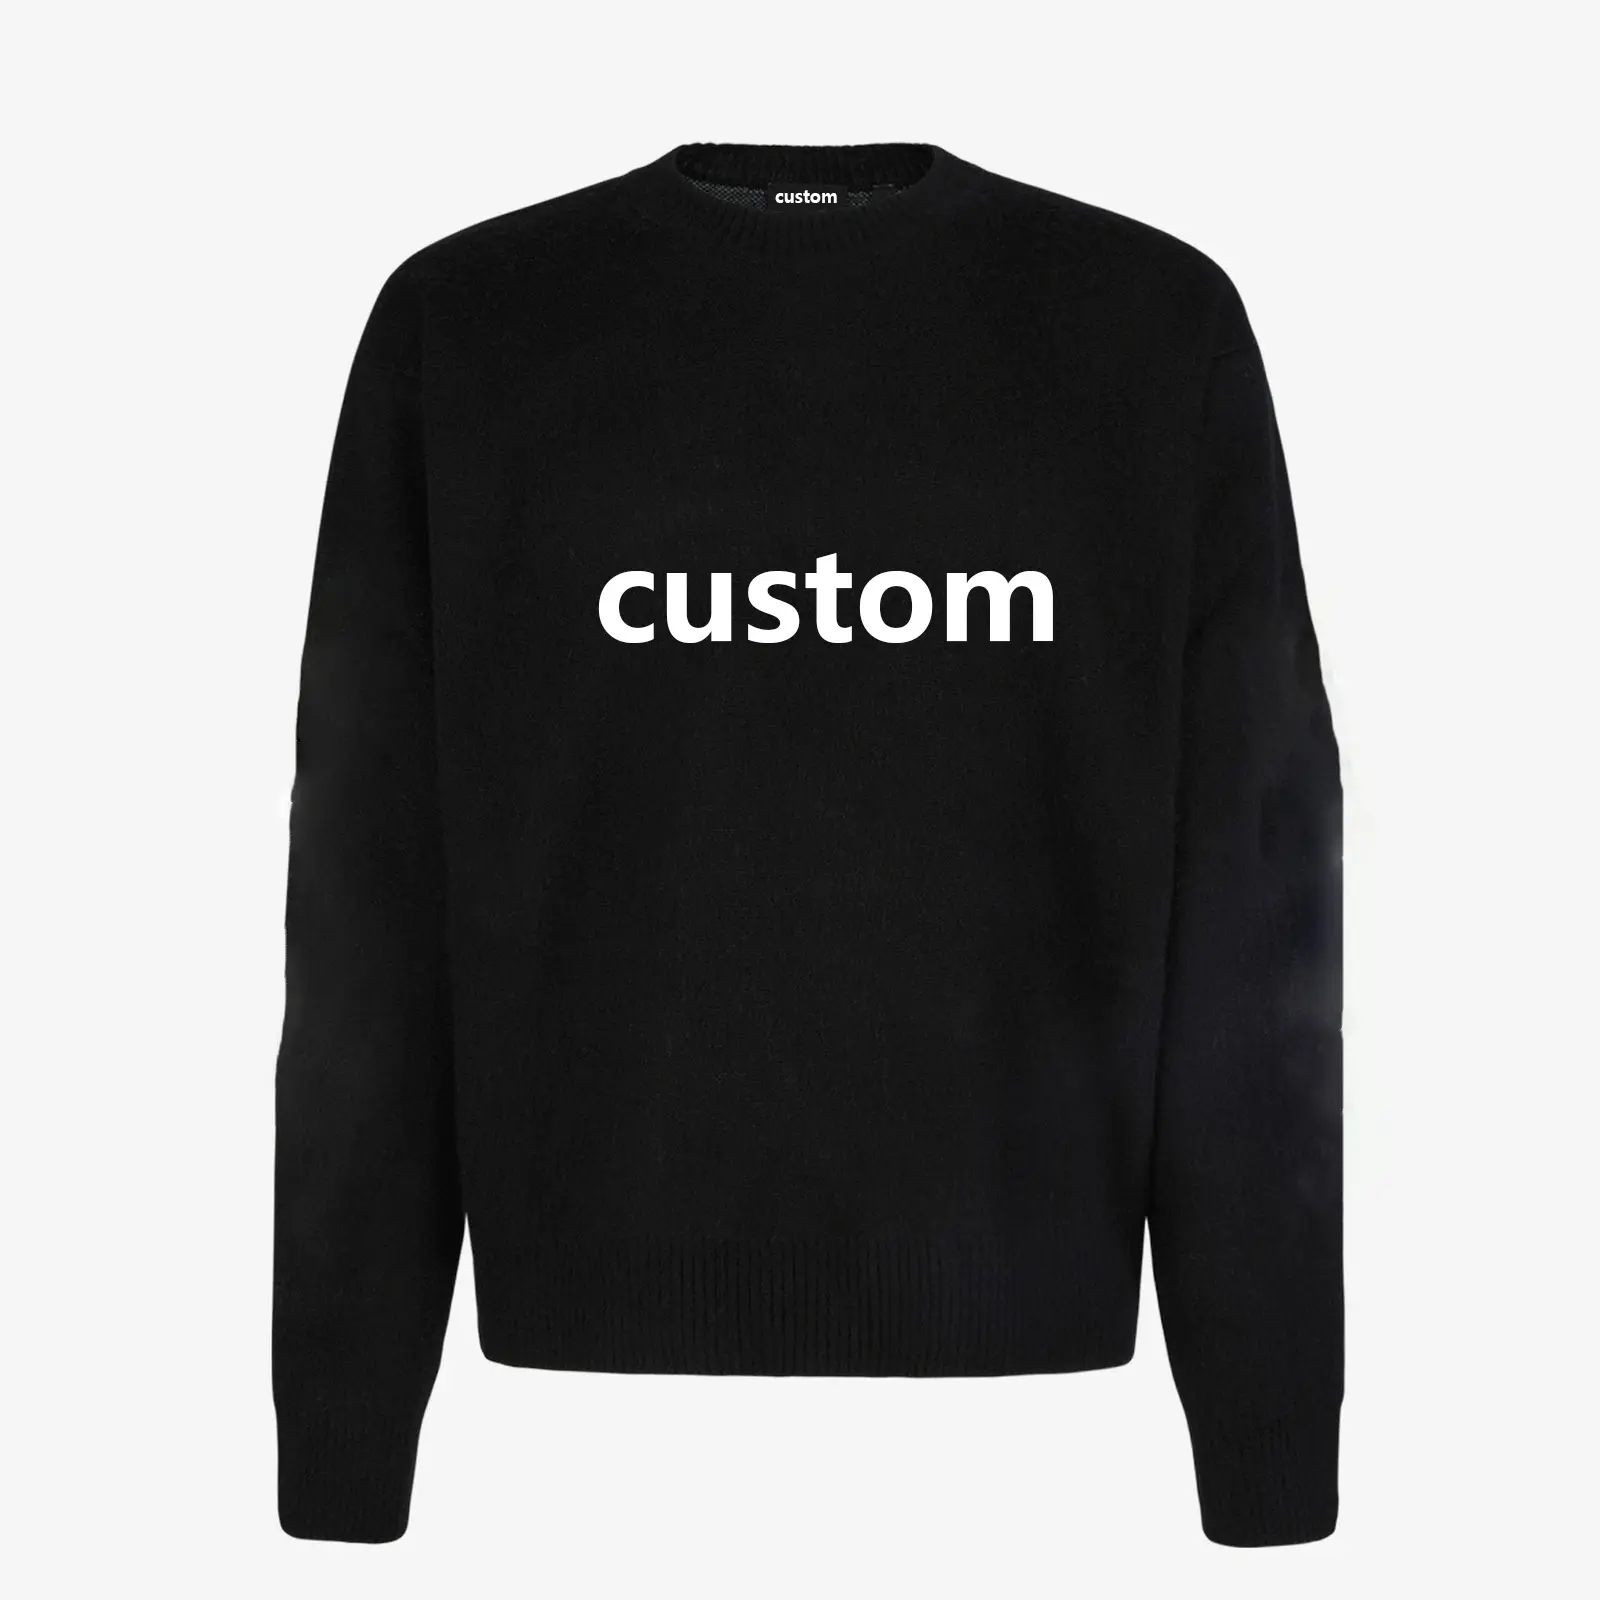 Wholesale custom promotional special offer custom logo steel cable knitted pullover sweater crew-neck knitted men's sweater